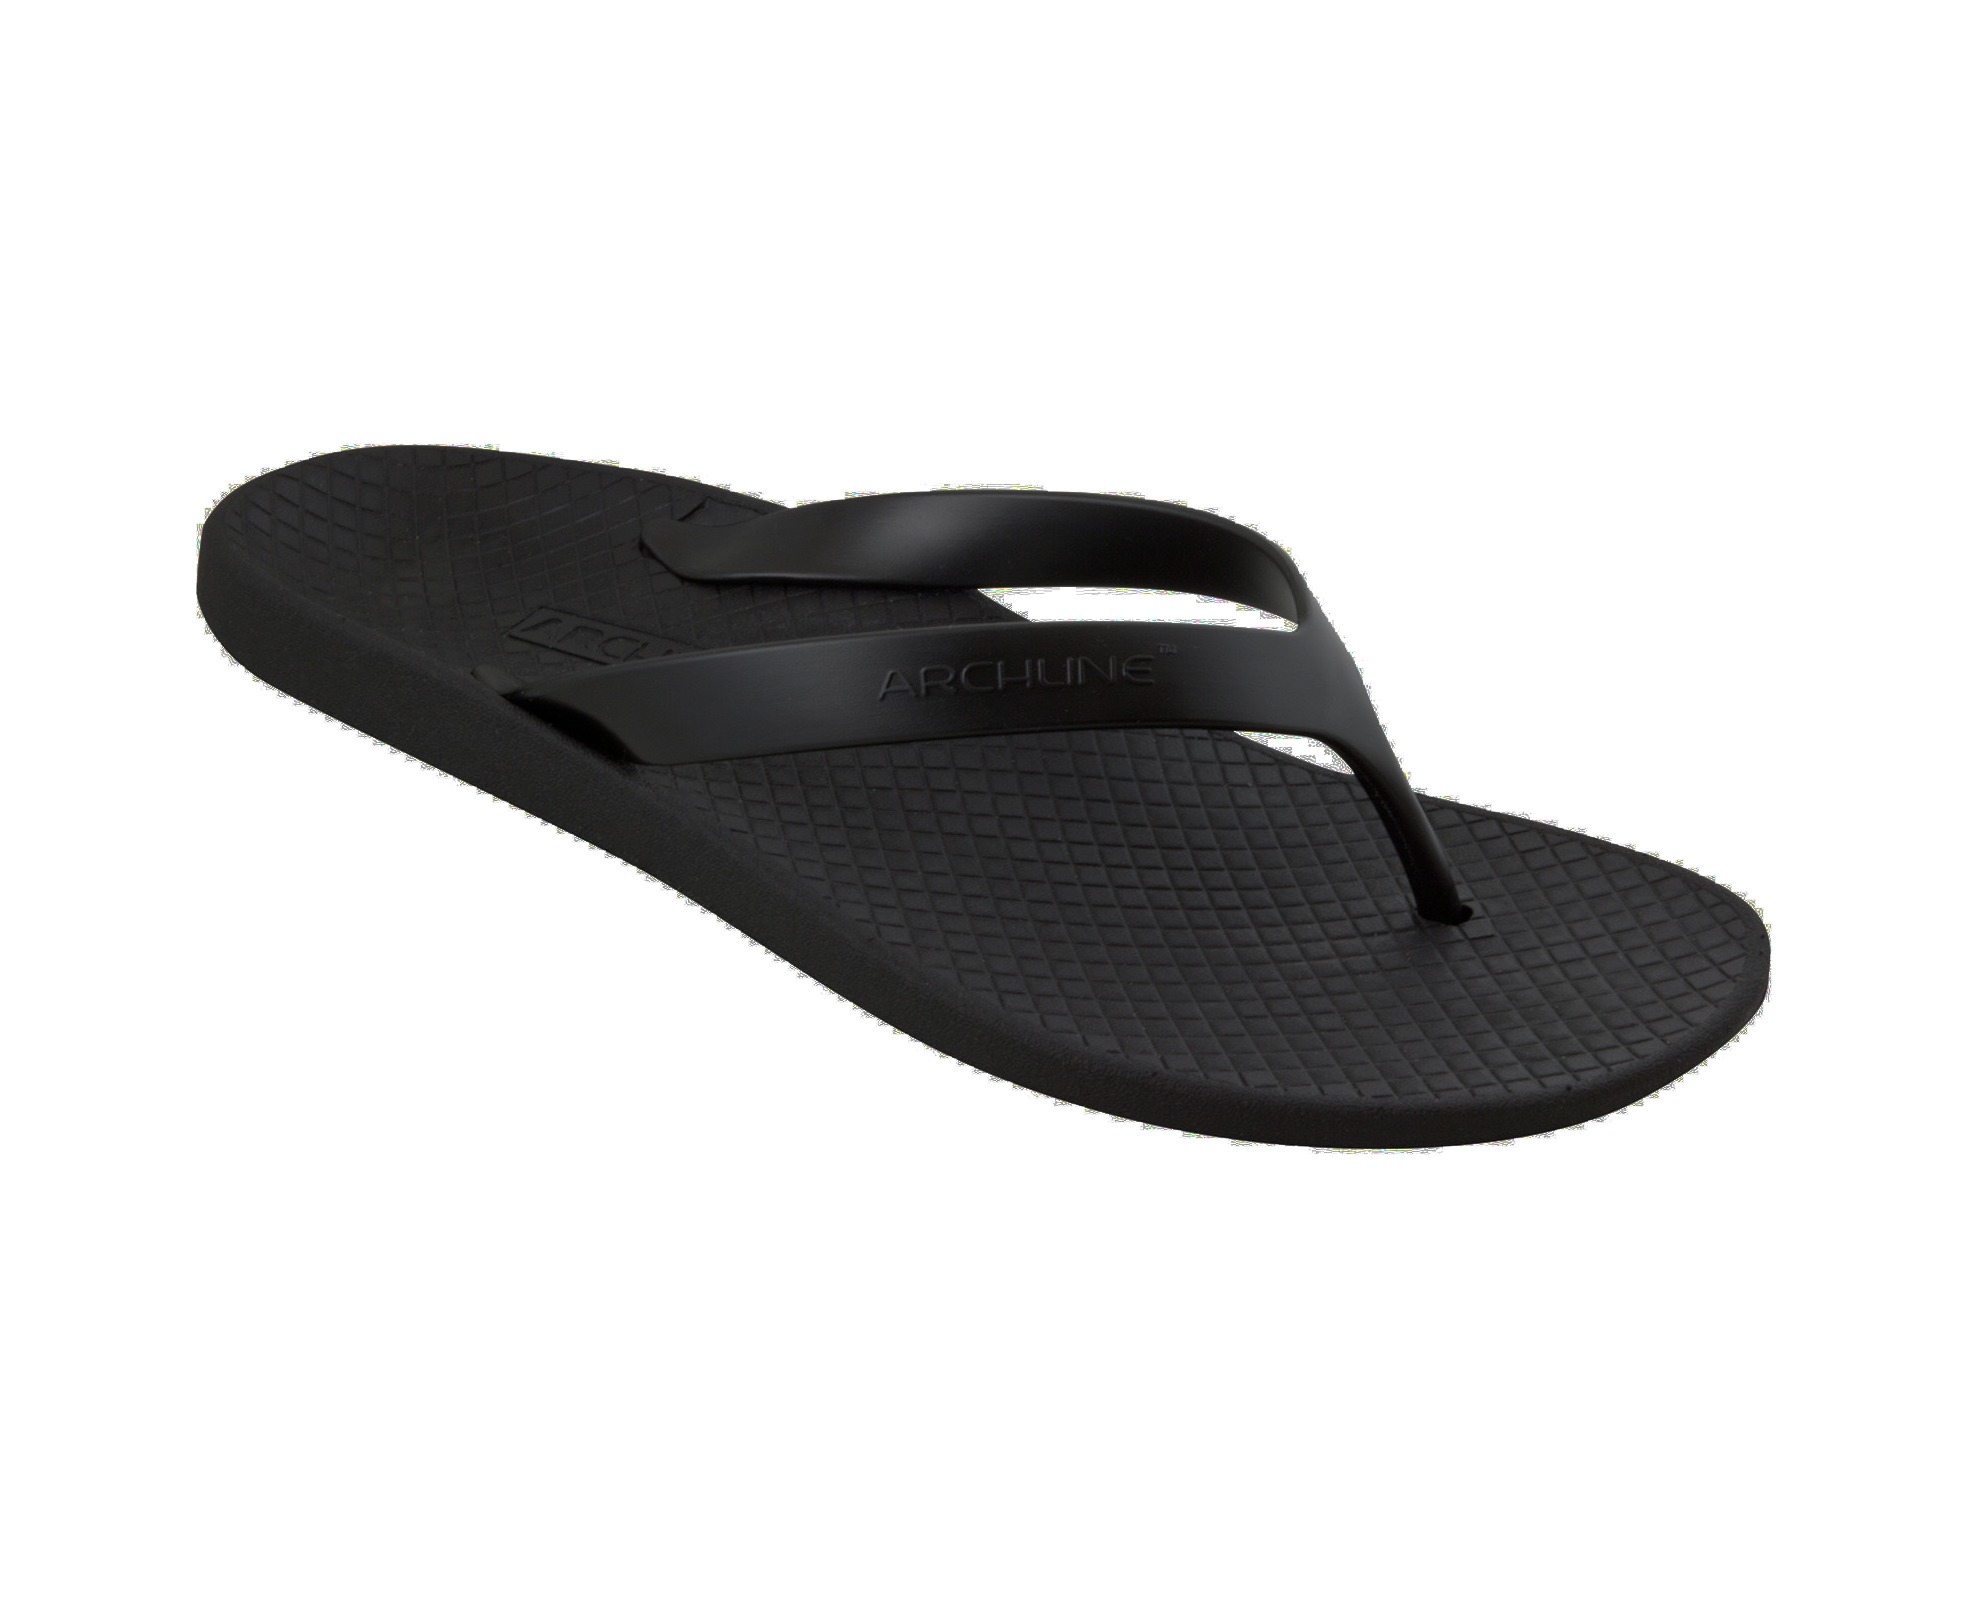 Archline Orthotic Arch Support Thongs Flip Flops - Black/Black | Catch ...